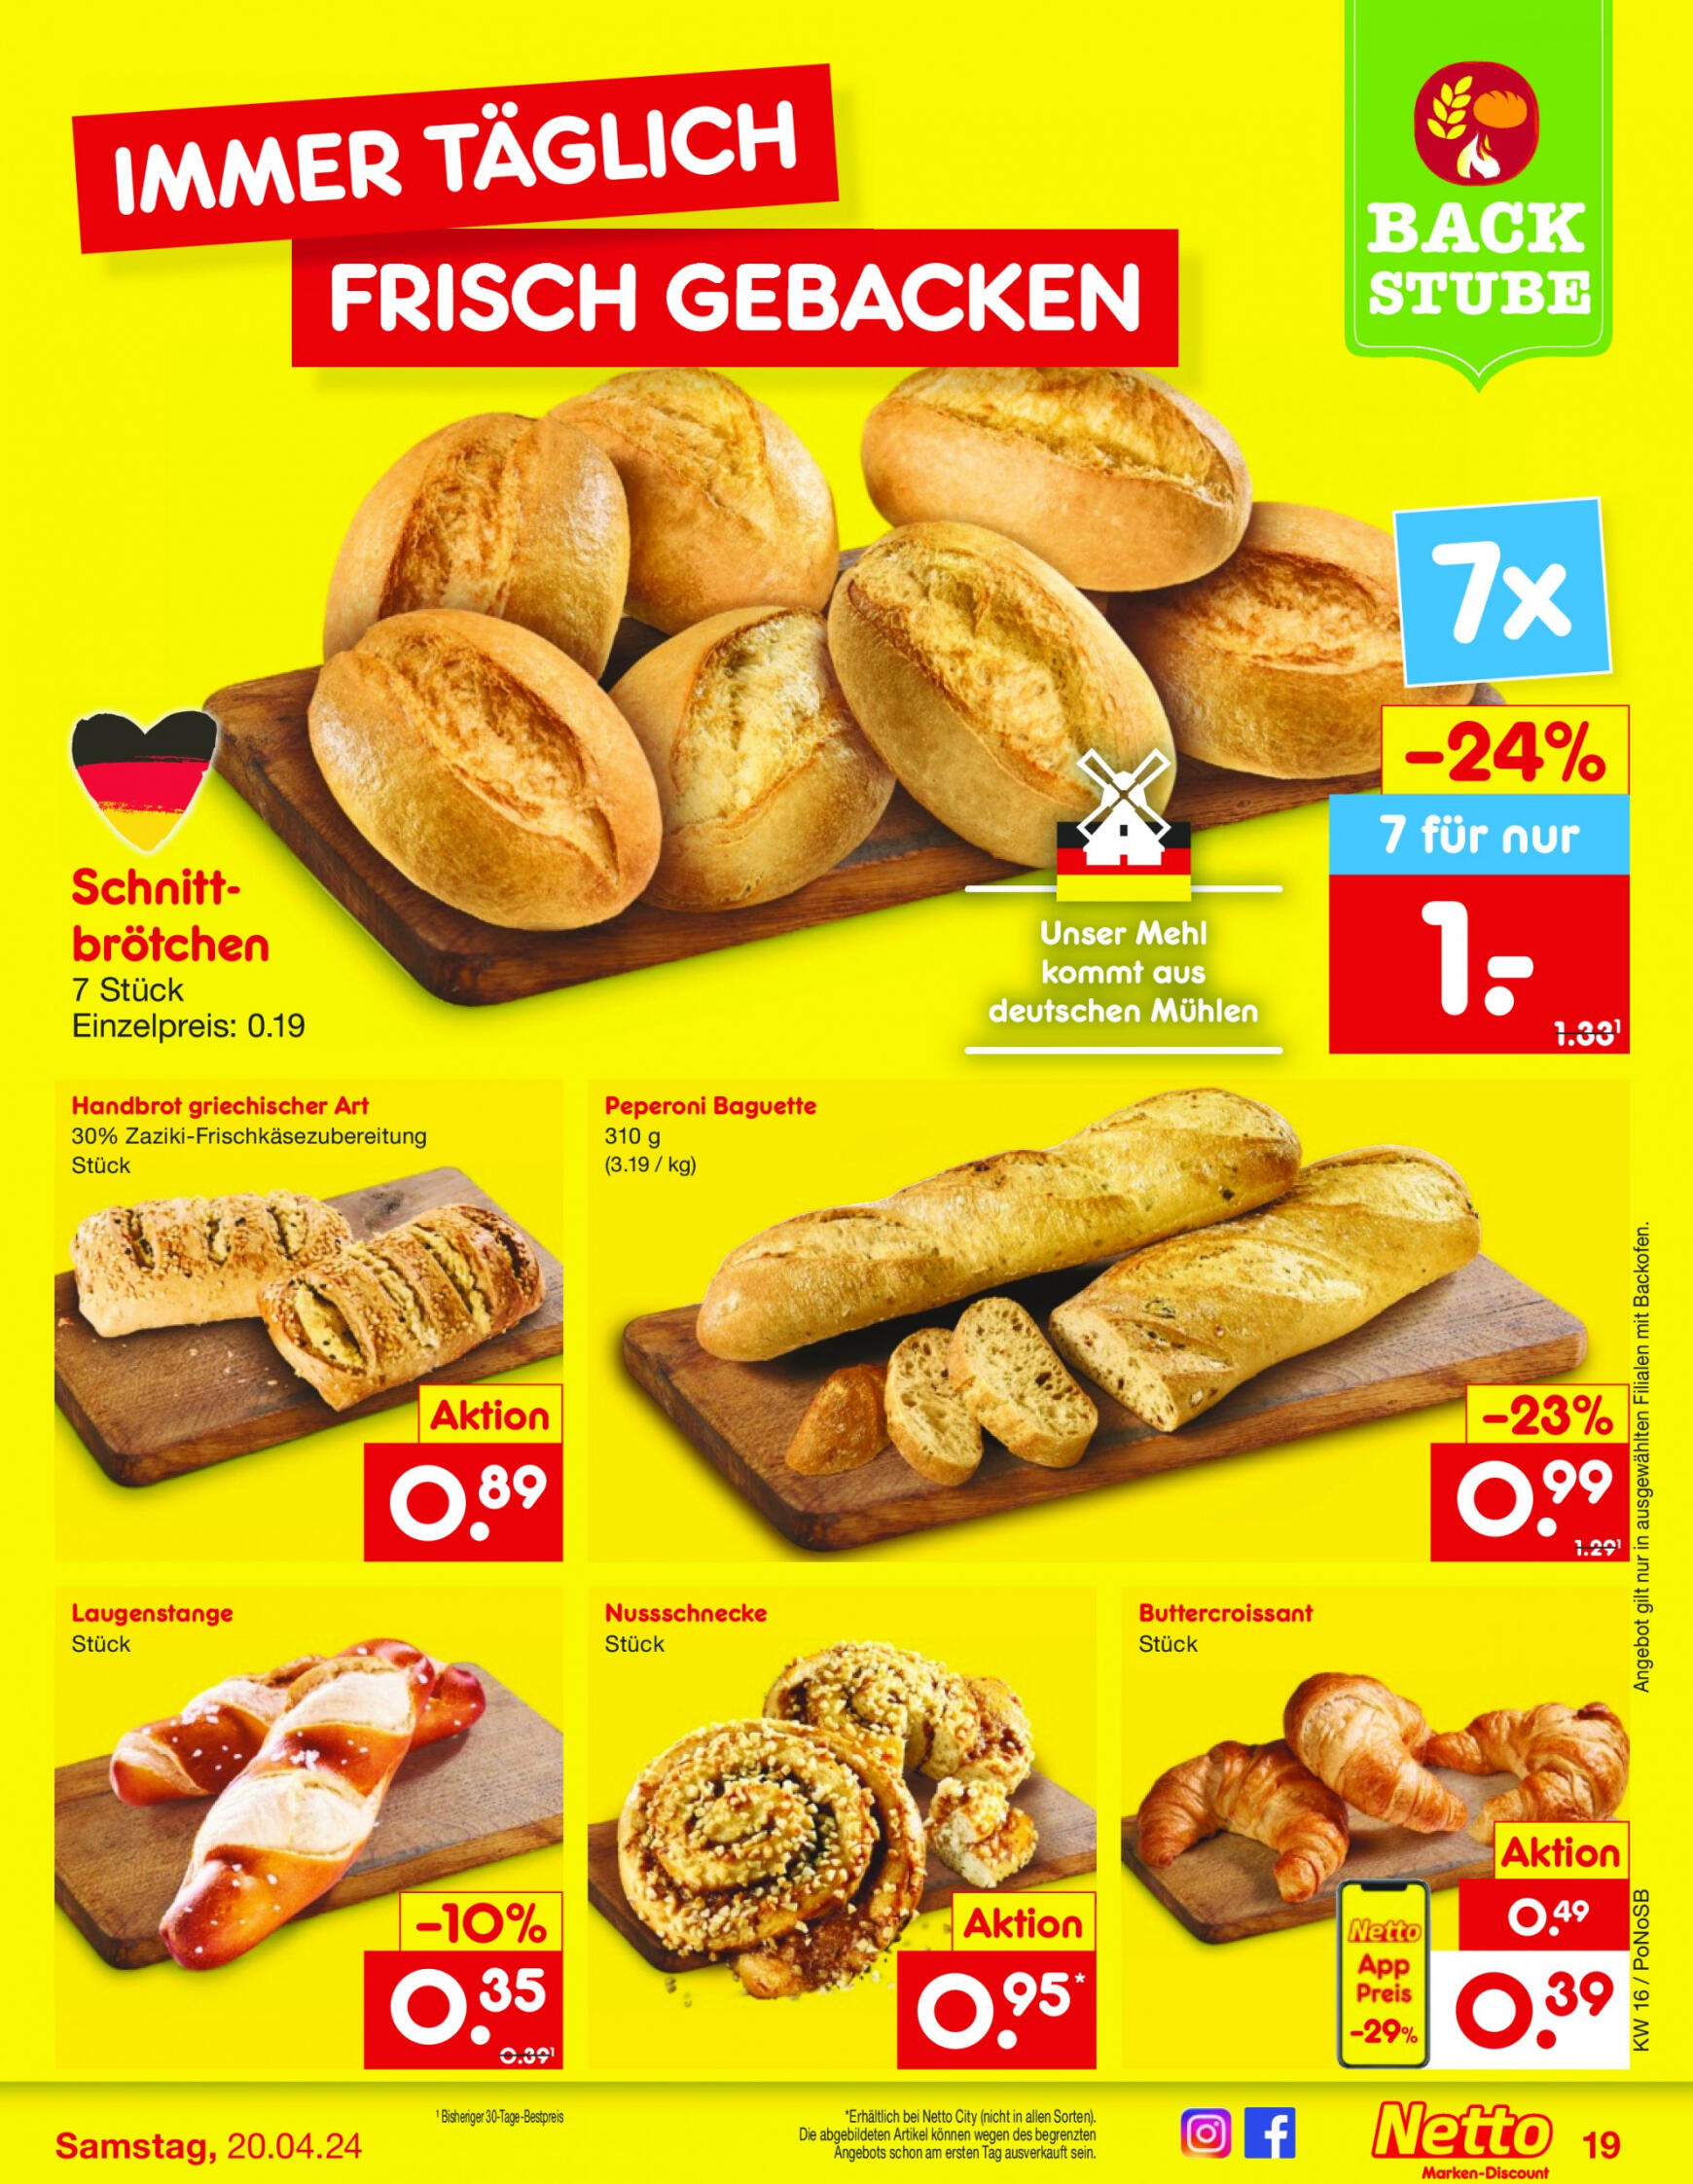 netto - Flyer Netto aktuell 15.04. - 20.04. - page: 25